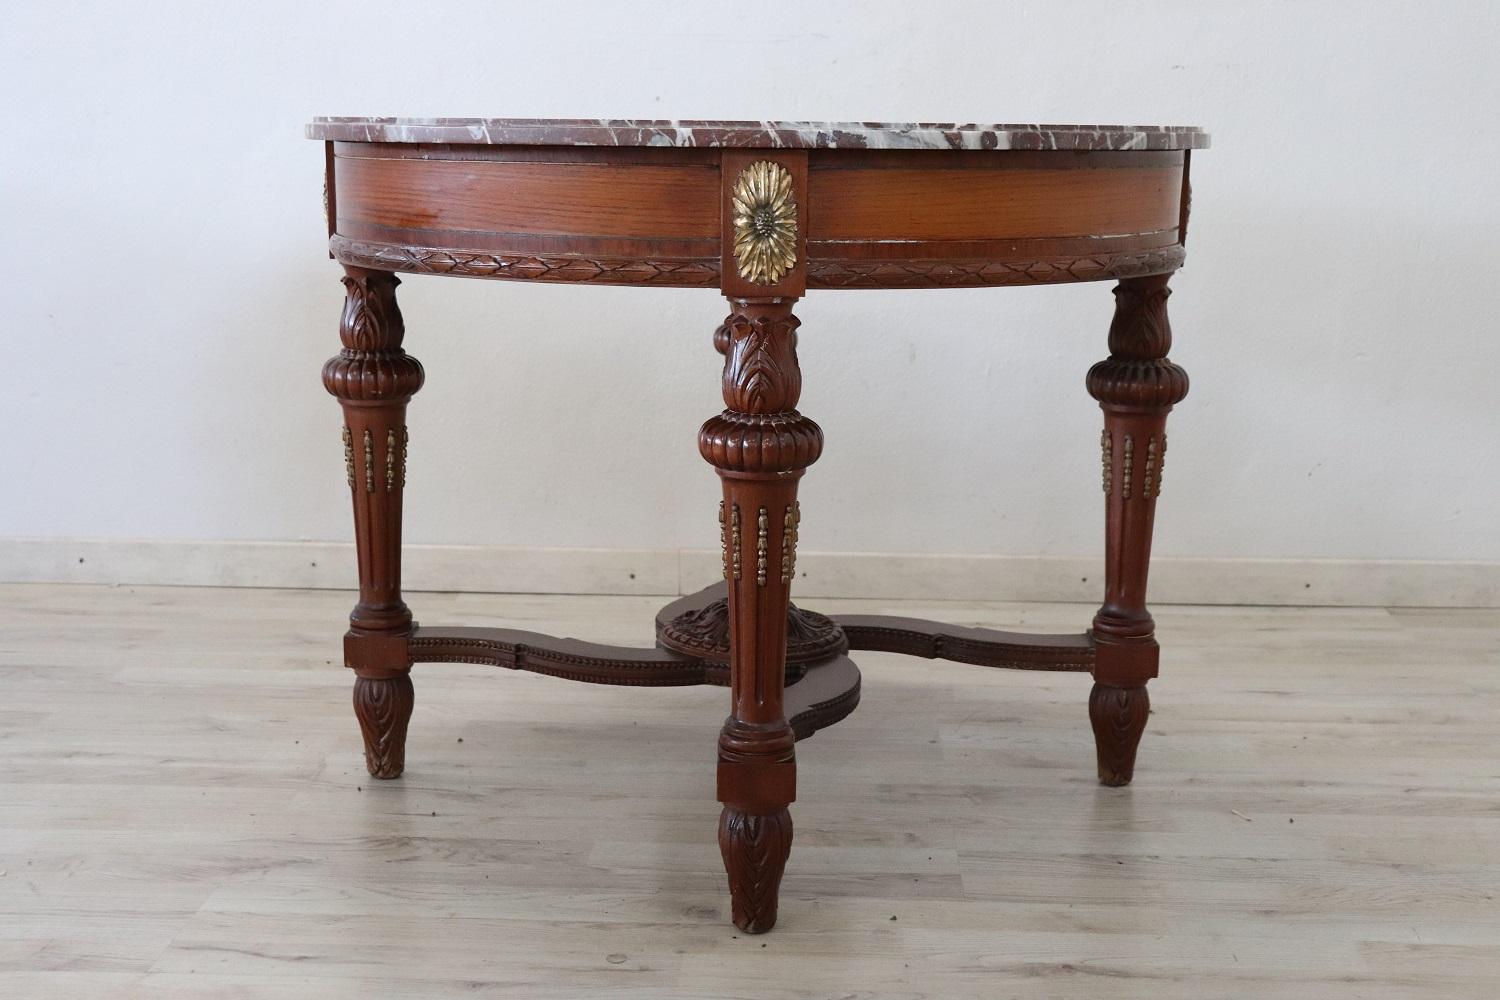 Beautiful important round center table 1930s in carved walnut. The top is supported by four turned and carved legs. The top is in fine red marble. Perfect conditions. Ideal table to embellish the center of a room.